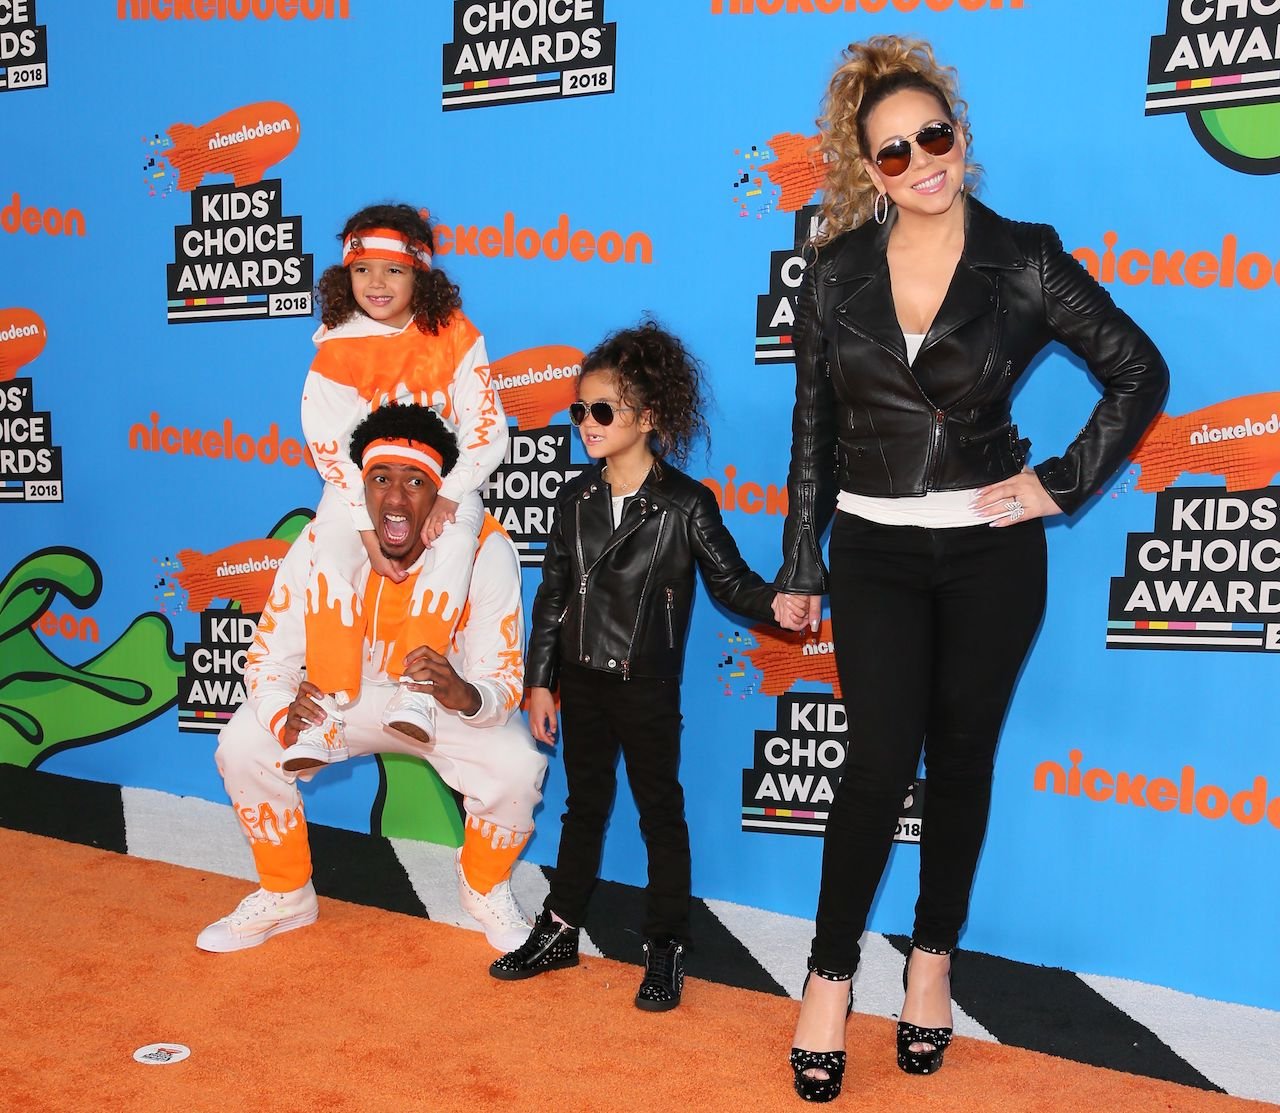 Mariah Carey and Nick Cannon pose on the red carpet with their children